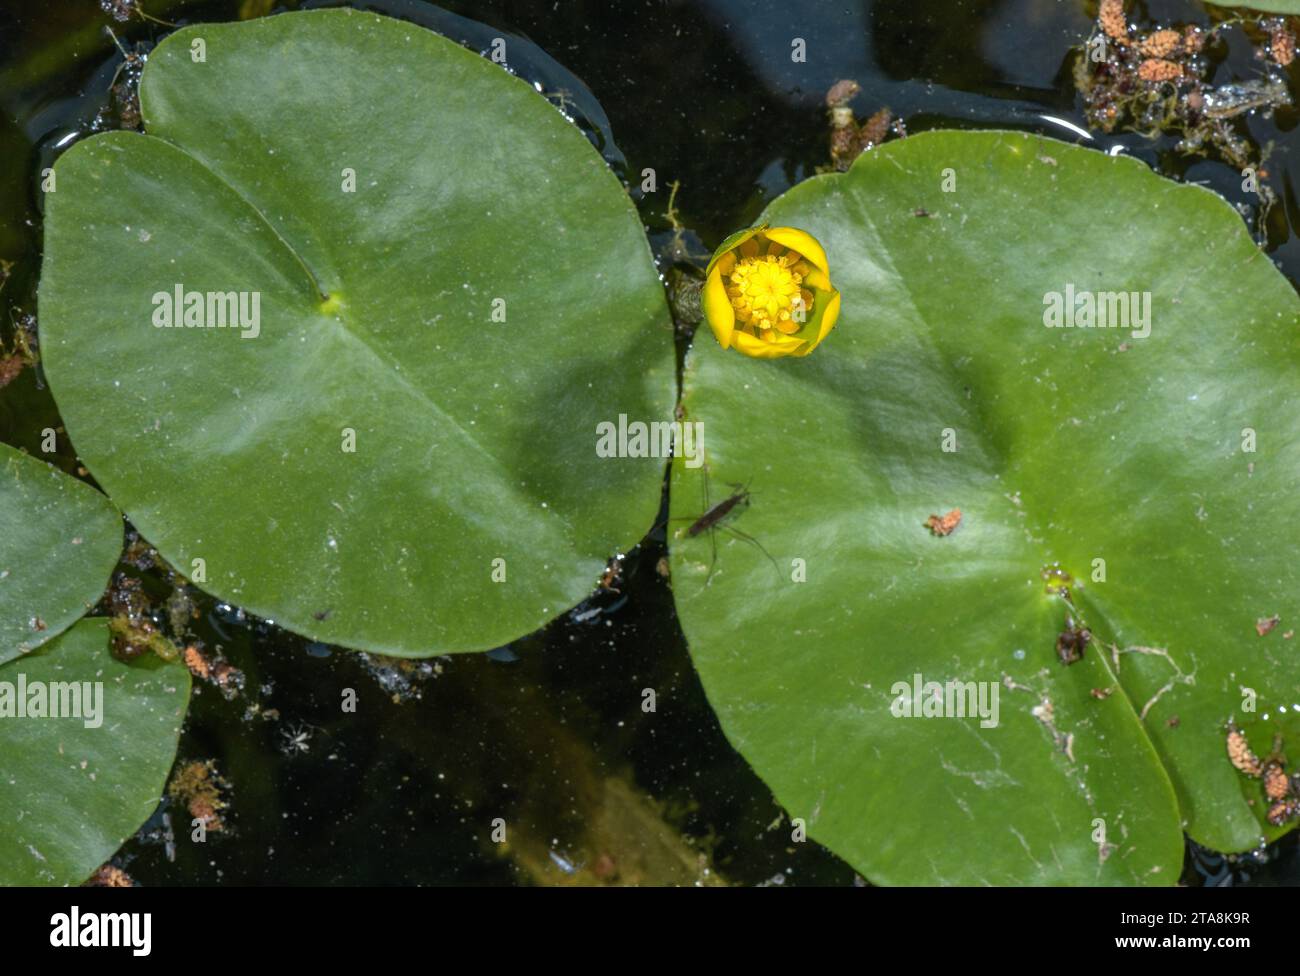 Least water-lily, Nuphar pumila in flower in small pond, northern Europe. Stock Photo